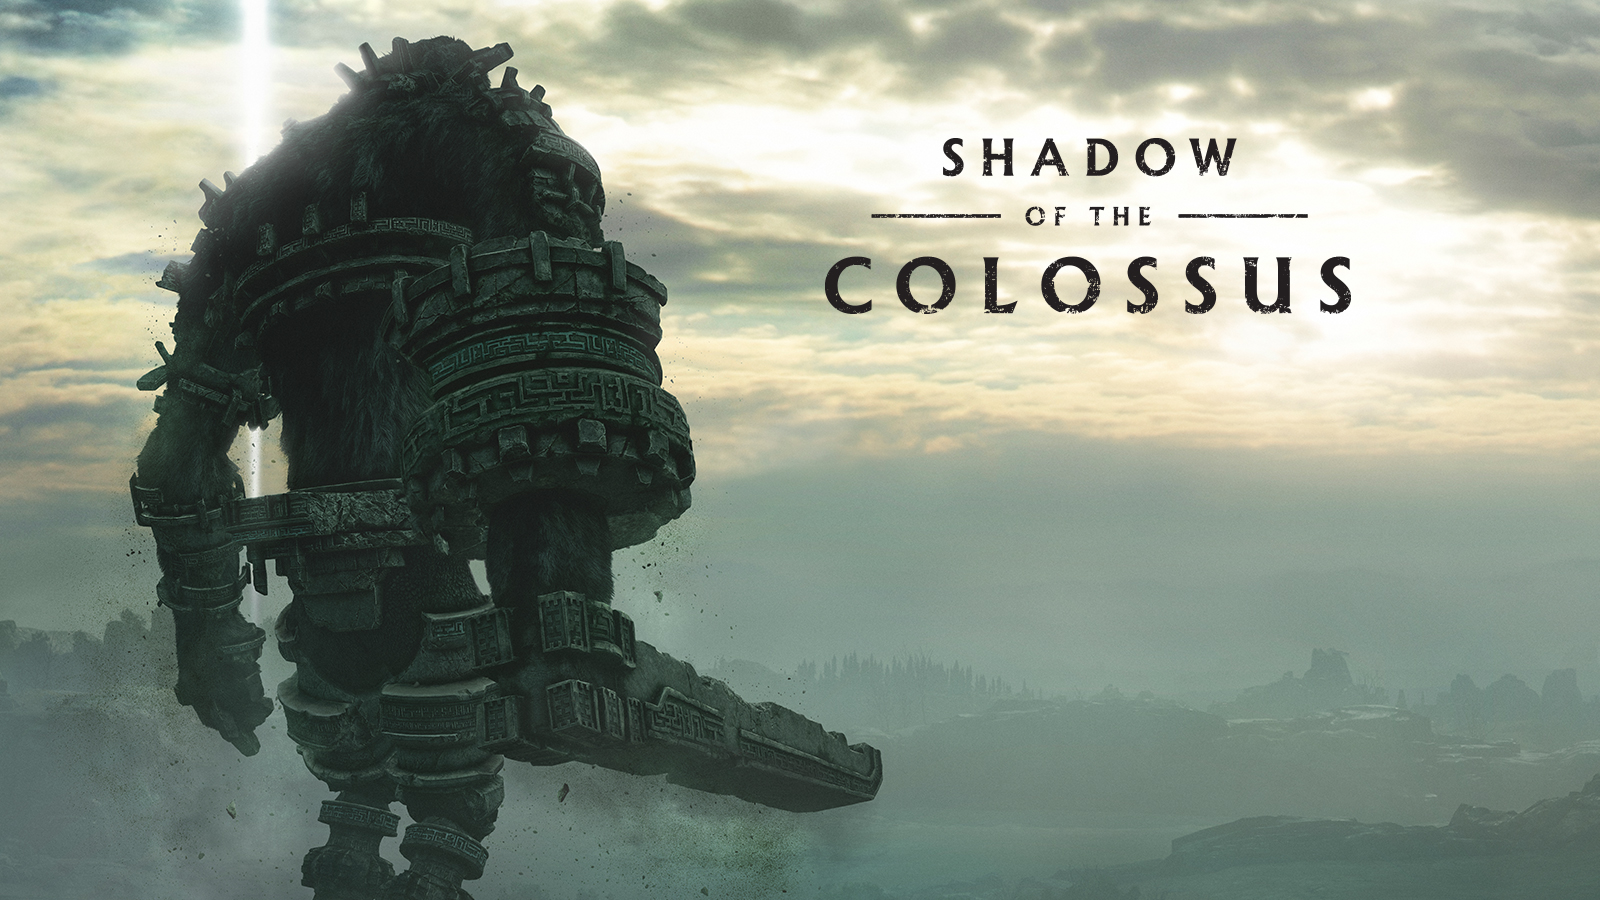 Image for 4K HDR! Shadow of the Colossus PS4 Remake!